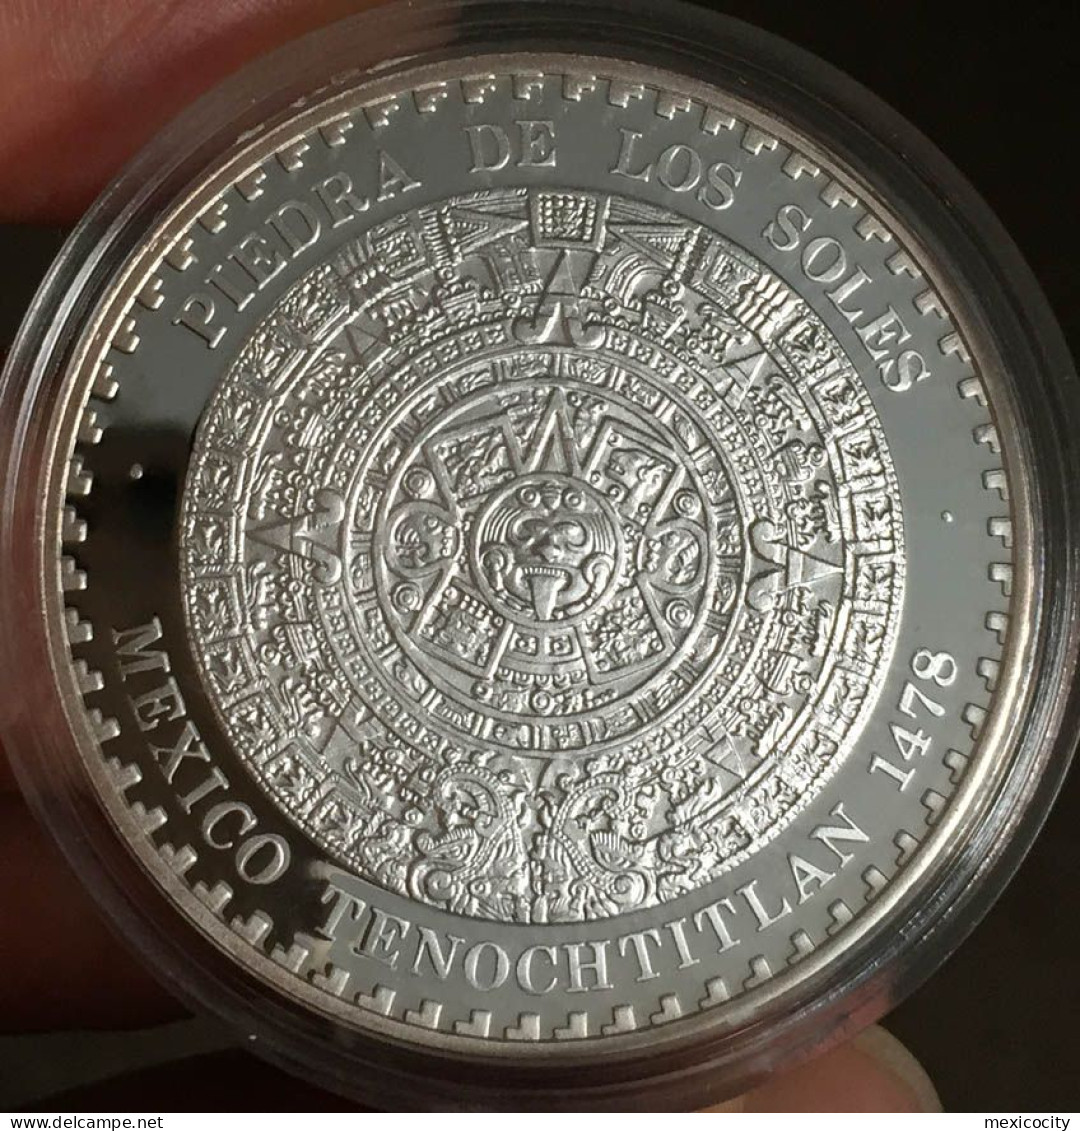 MEXICO Mint AZTEC CALENDAR & Old Coin Press .999 Silver Ounce PROOF Cond. Unc., In Capsule - Mexico